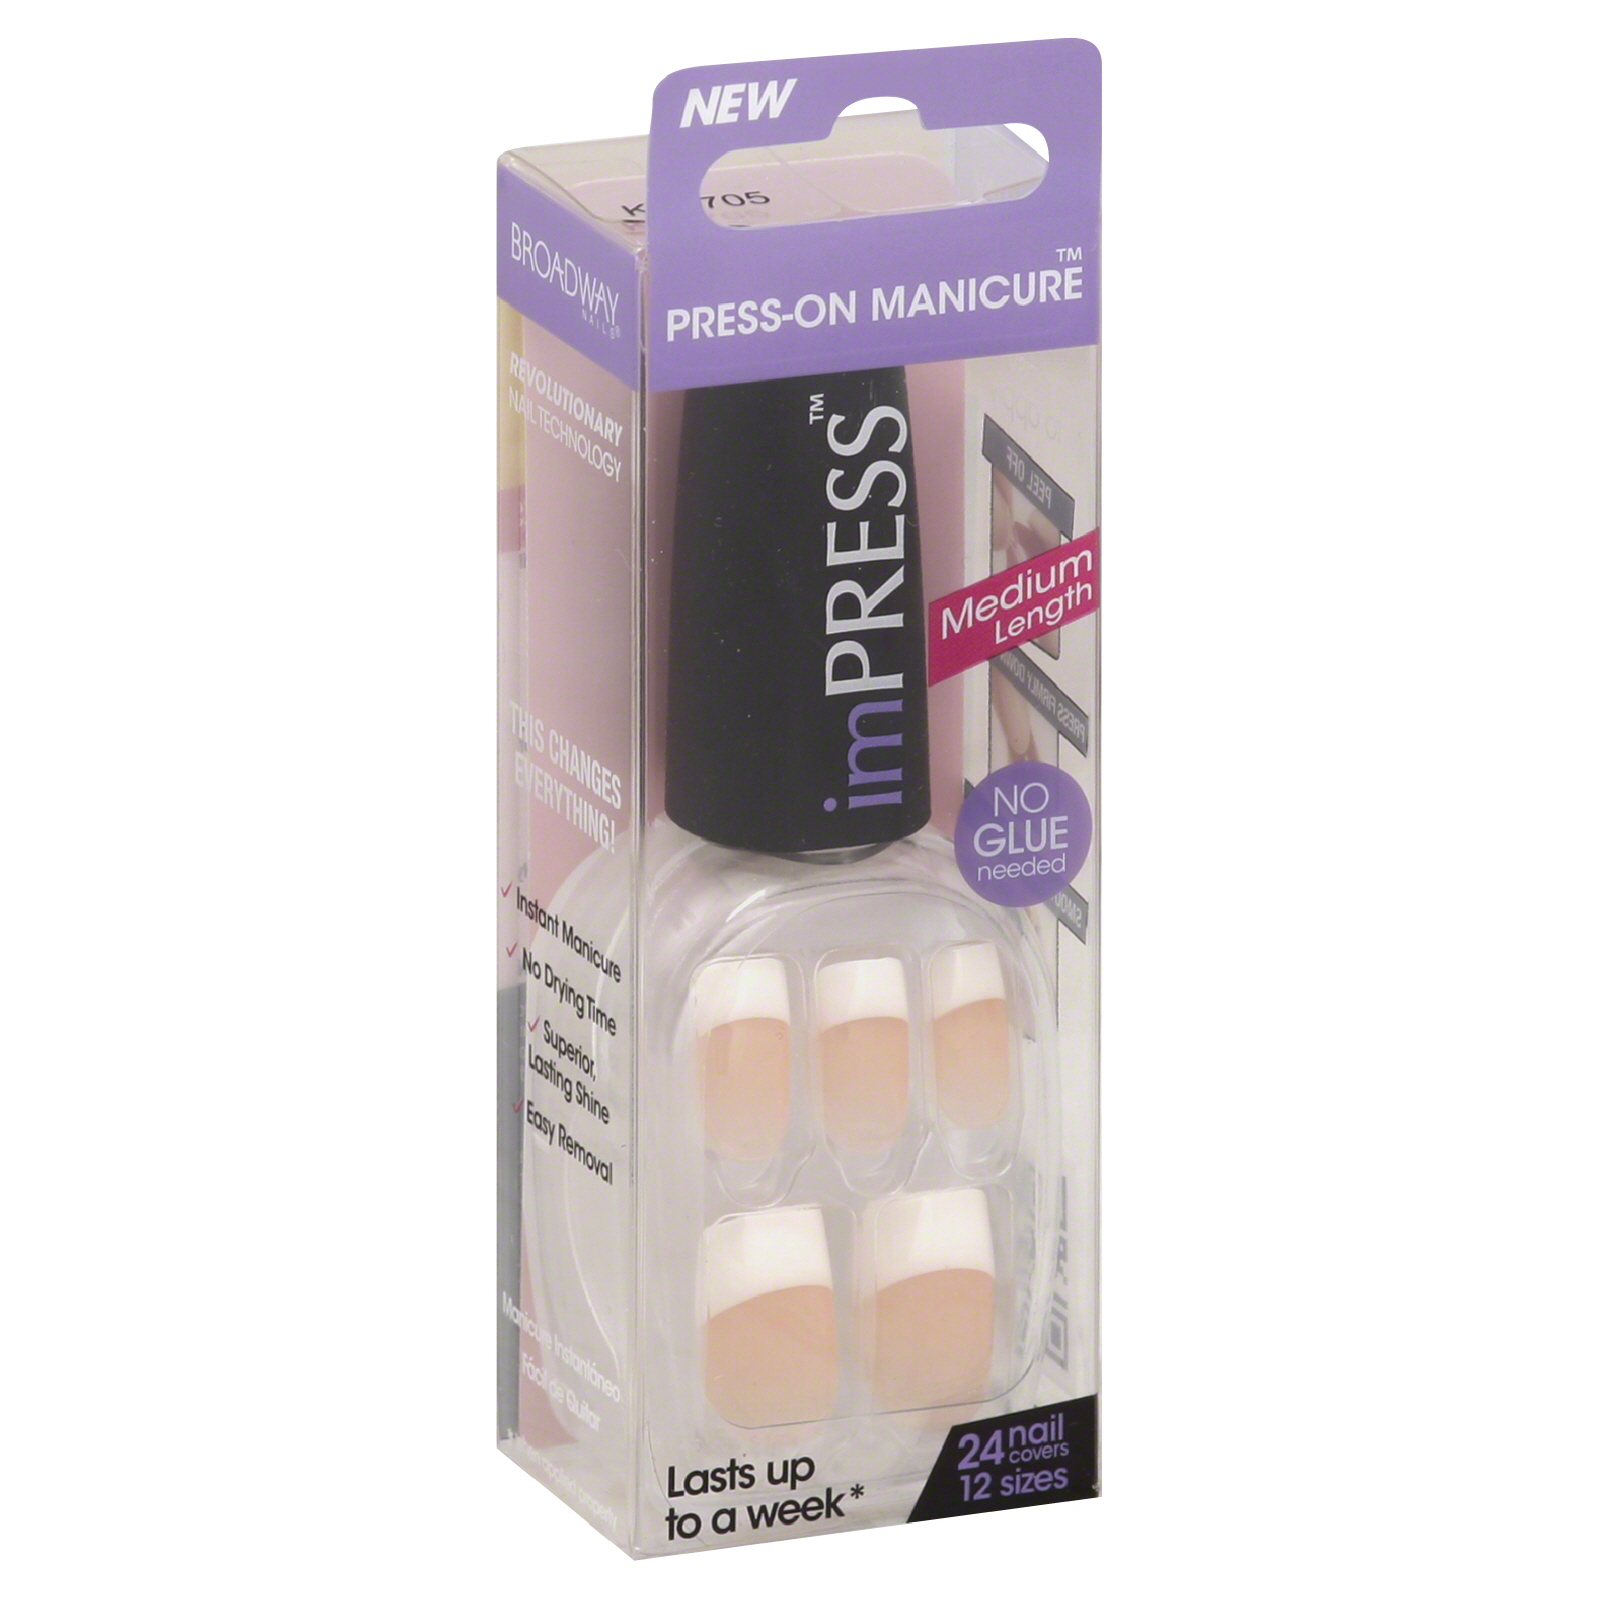 Broadway Nails Press-On Manicure, Medium Length, Vexed & Vicious, 24 Ct